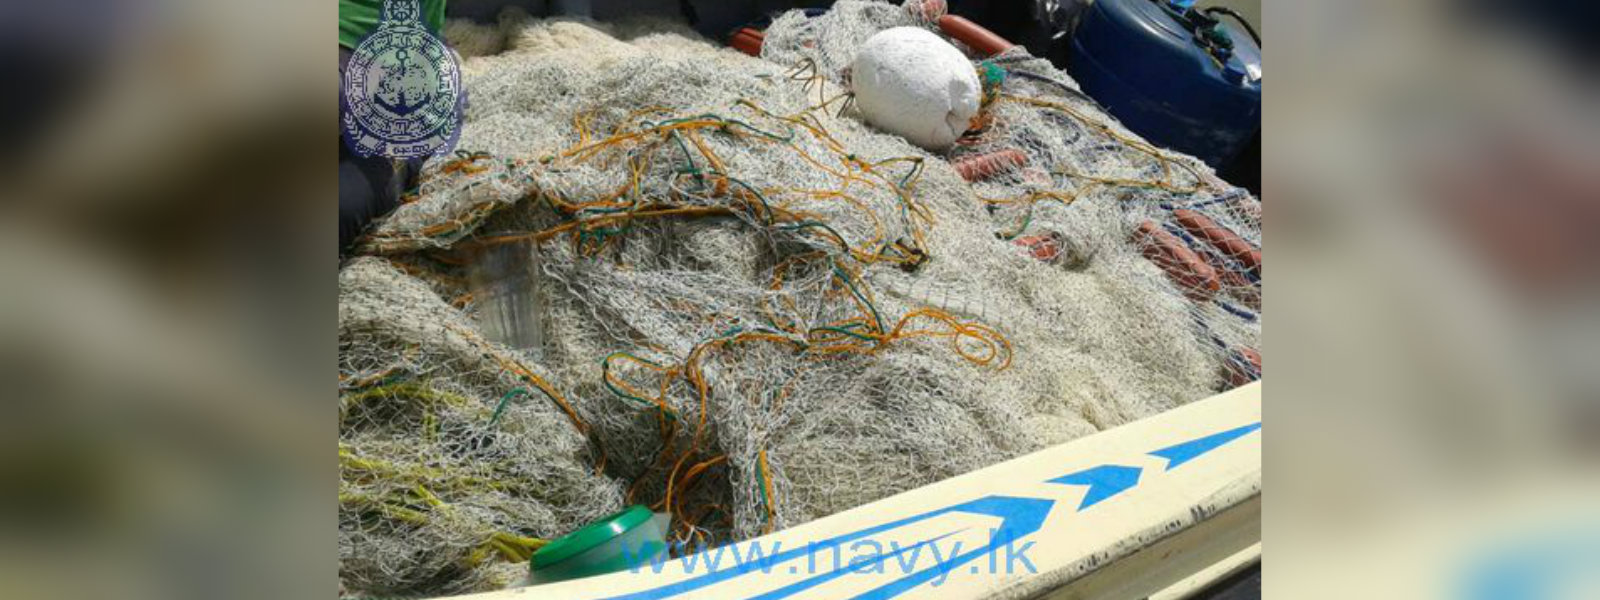 13 suspects engaged in illegal fishing apprehended